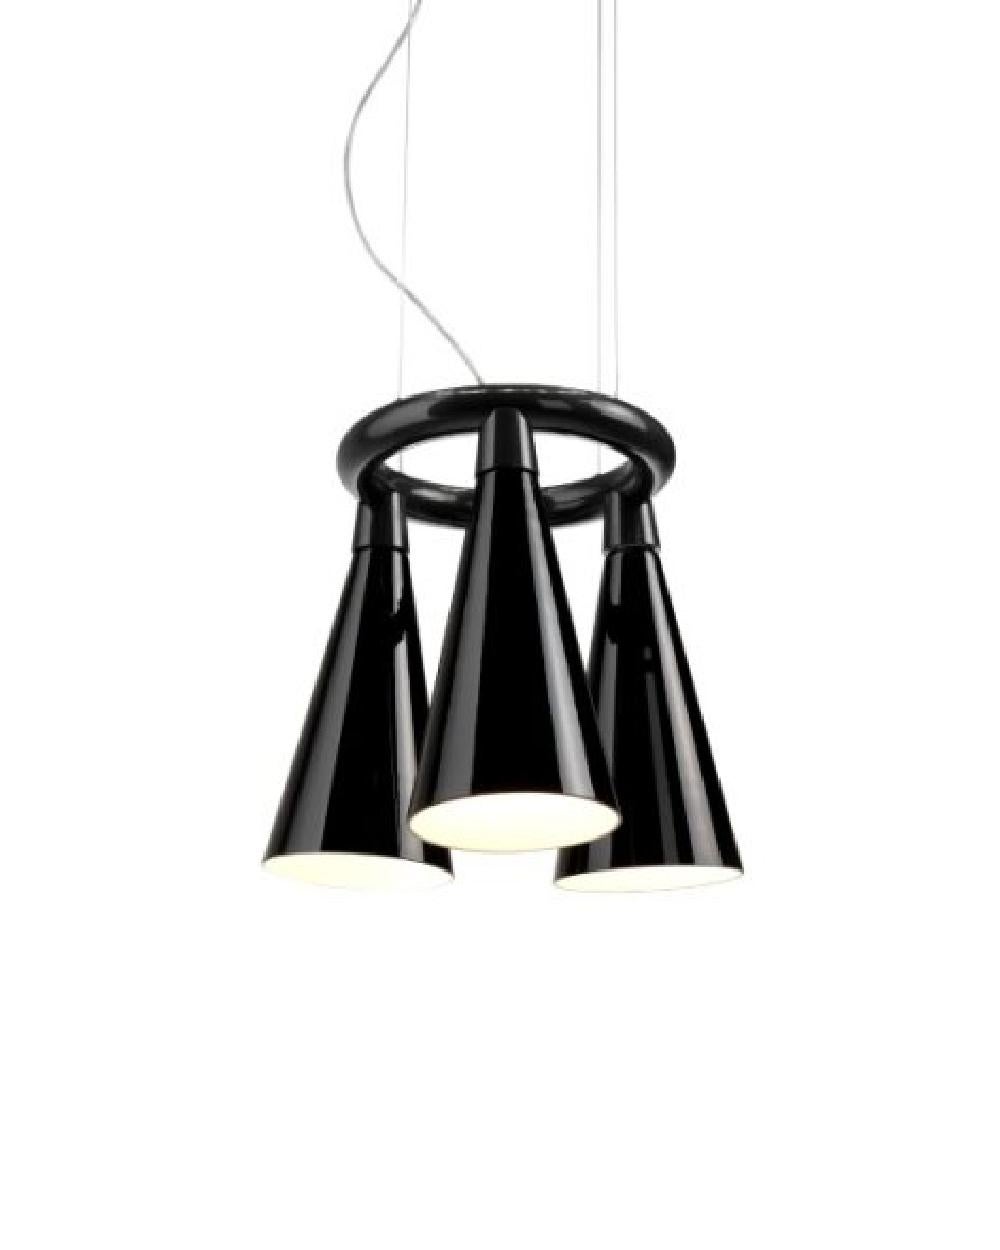 A chandelier reminiscent of pendulous bat colonies decorating tree branches and cave ceilings, Komori’s hand-blown distributed glass shades enclose individual lights, casting their illuminance downward. Bases can be connected to create a large